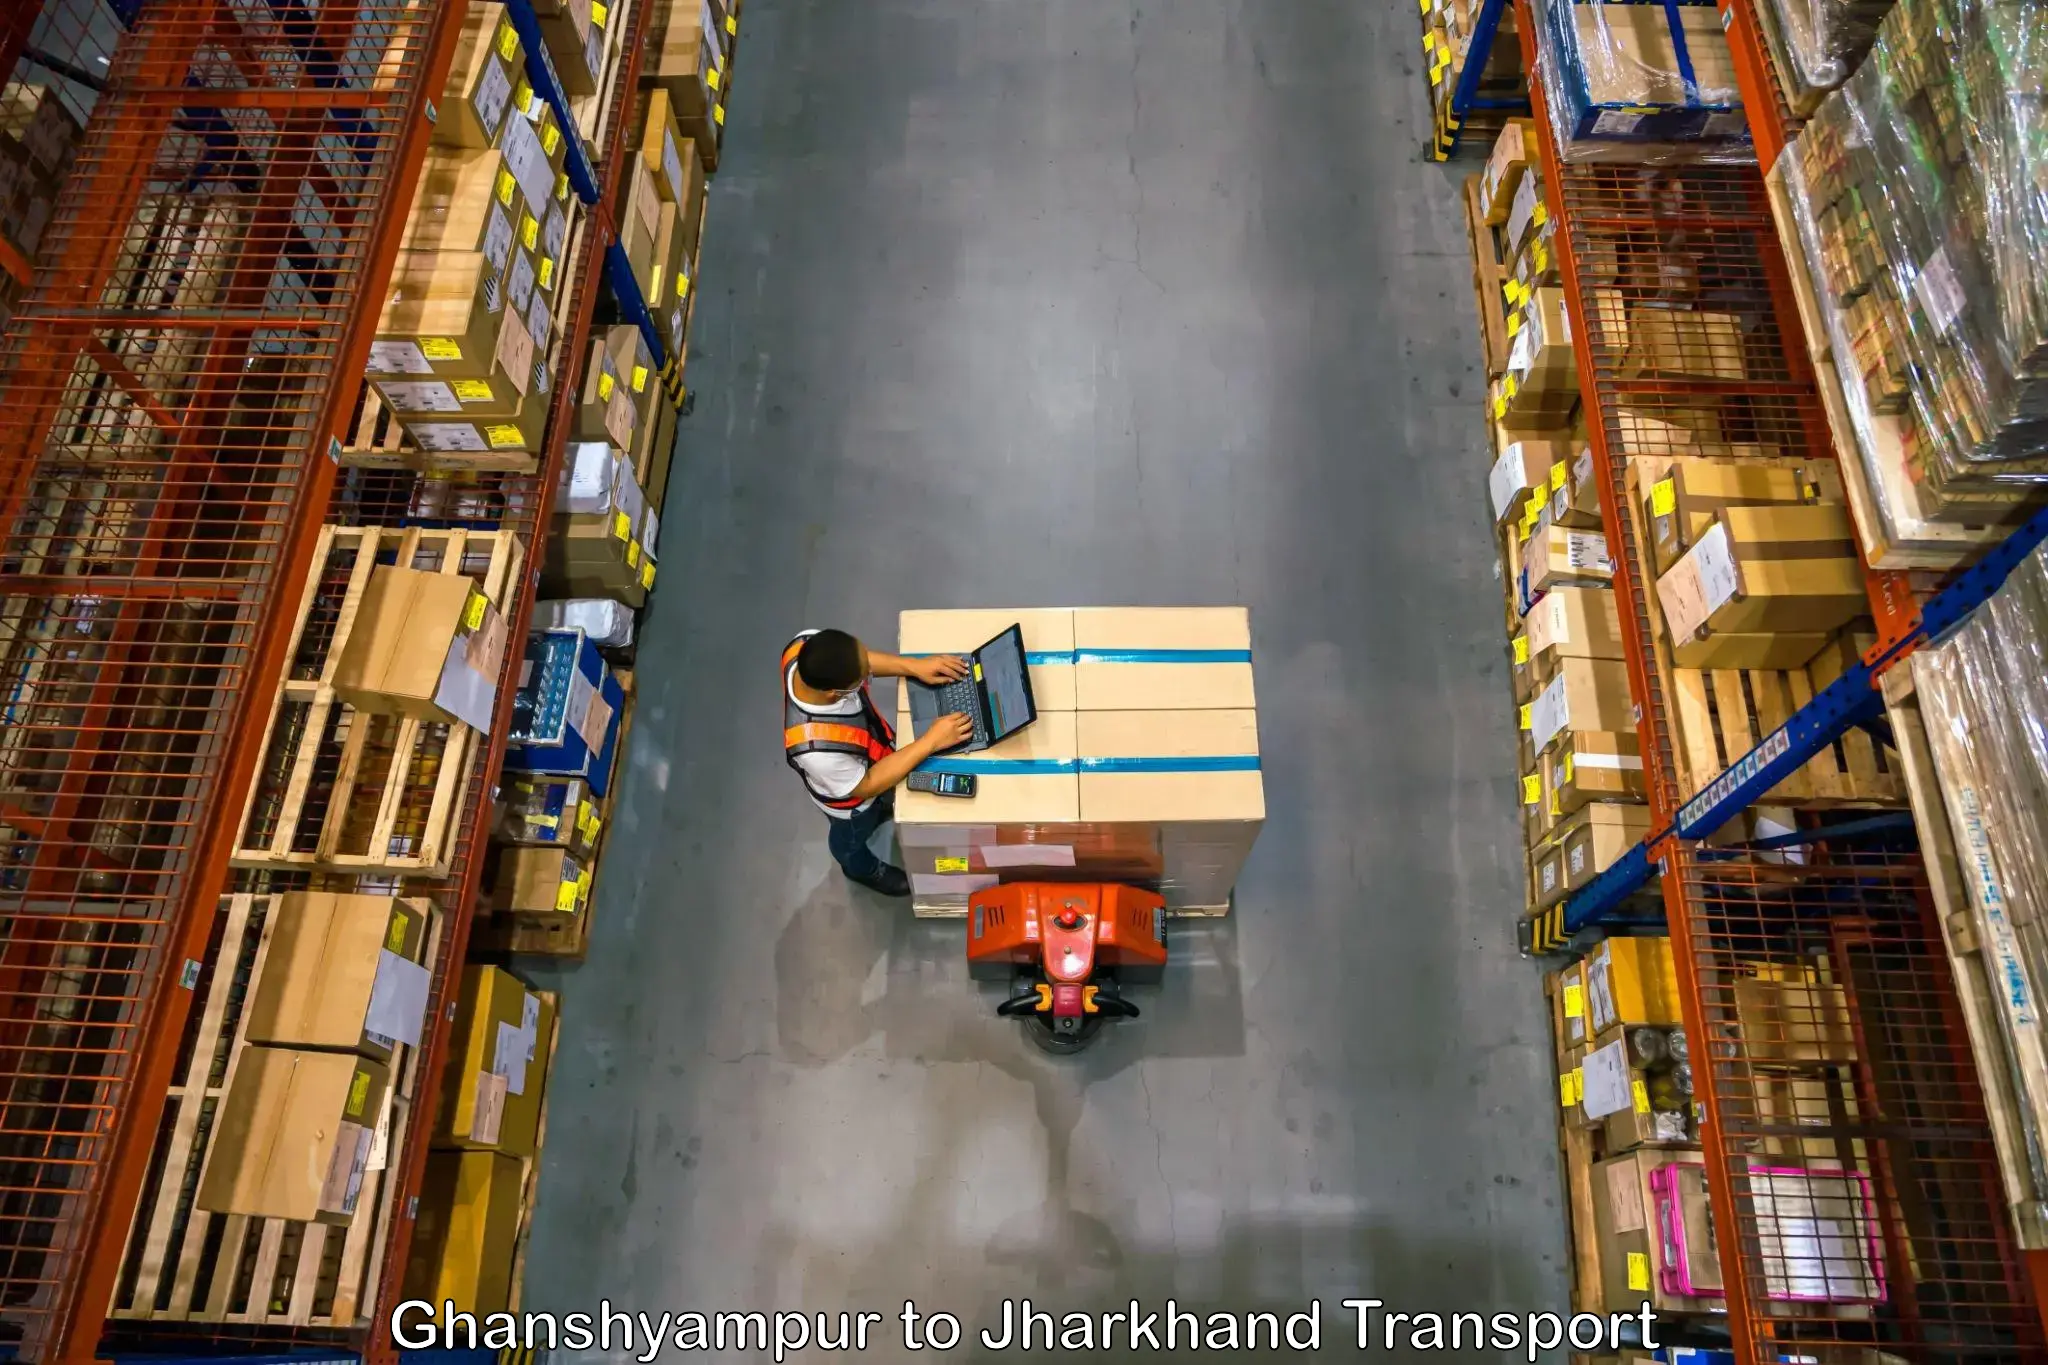 Commercial transport service Ghanshyampur to Adityapur